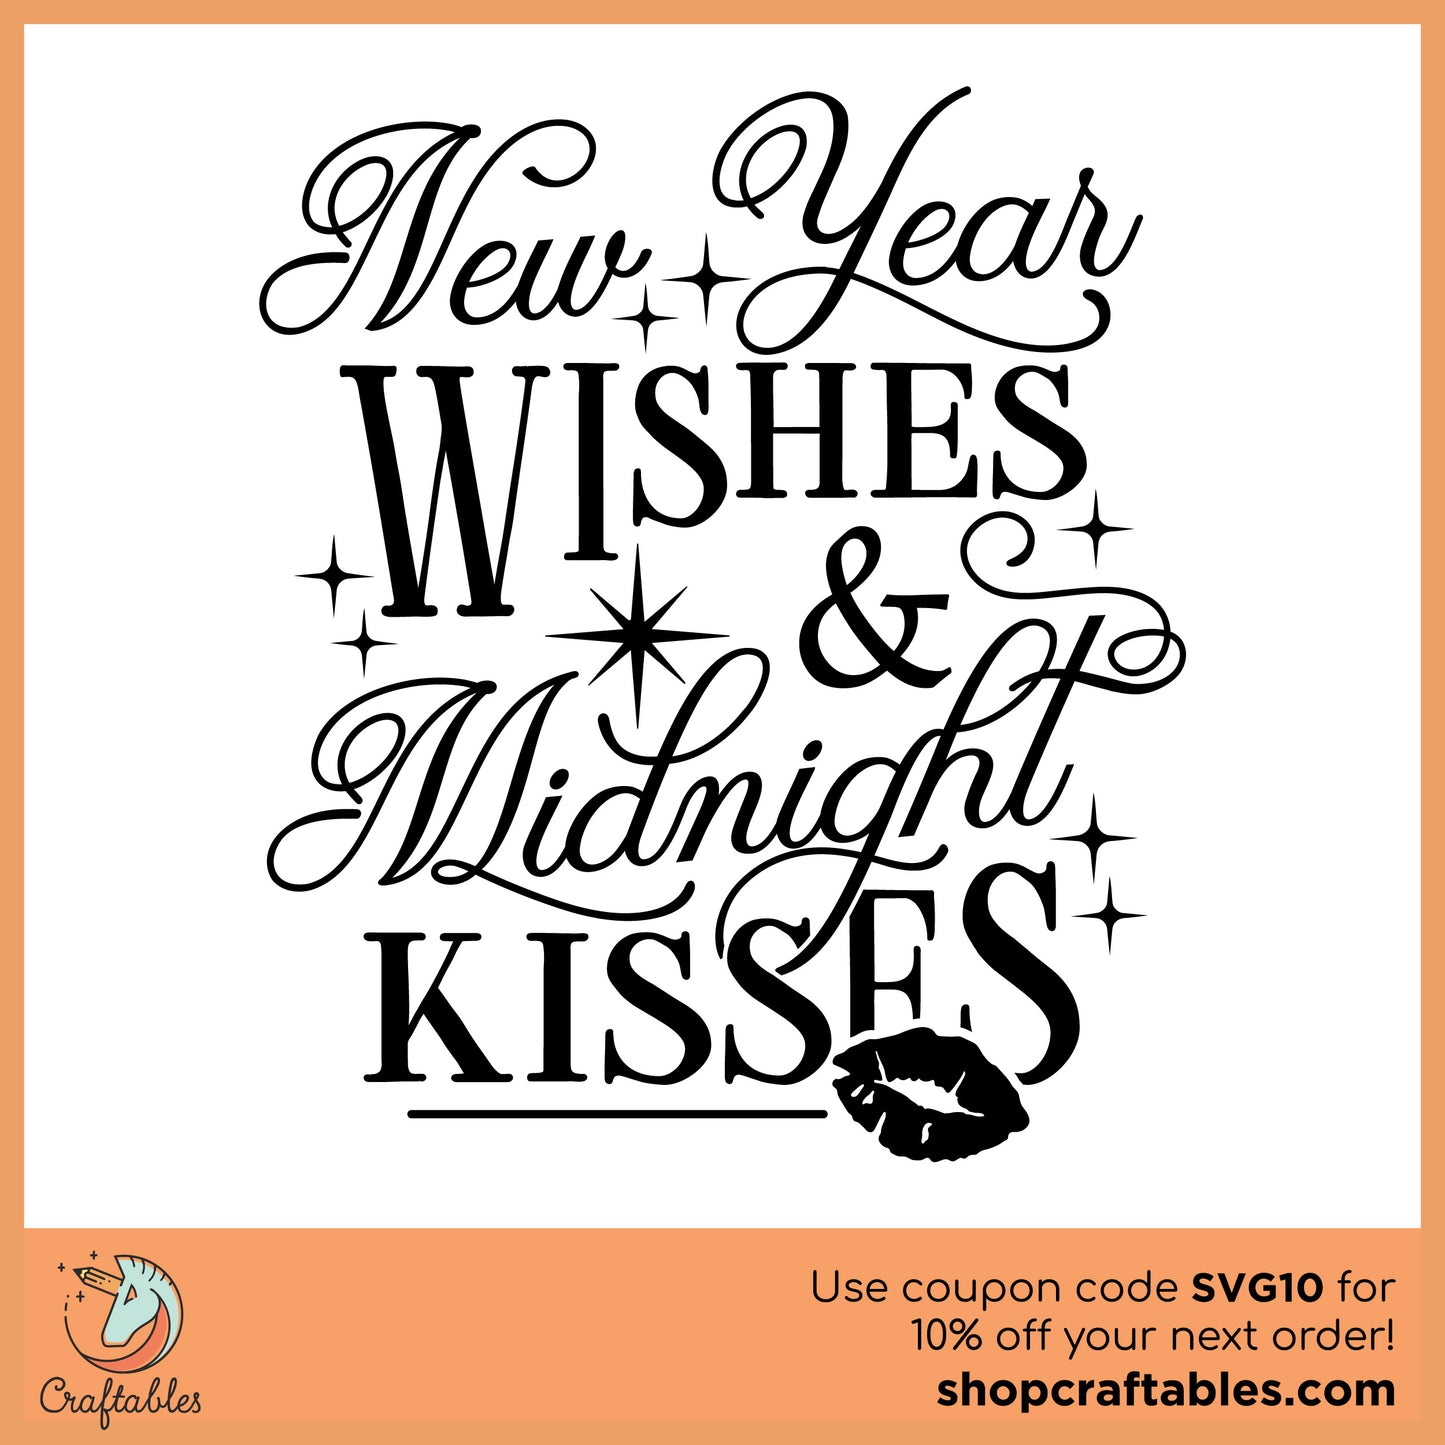 Free New Year Wishes and Midnight Kisses SVG Cut File